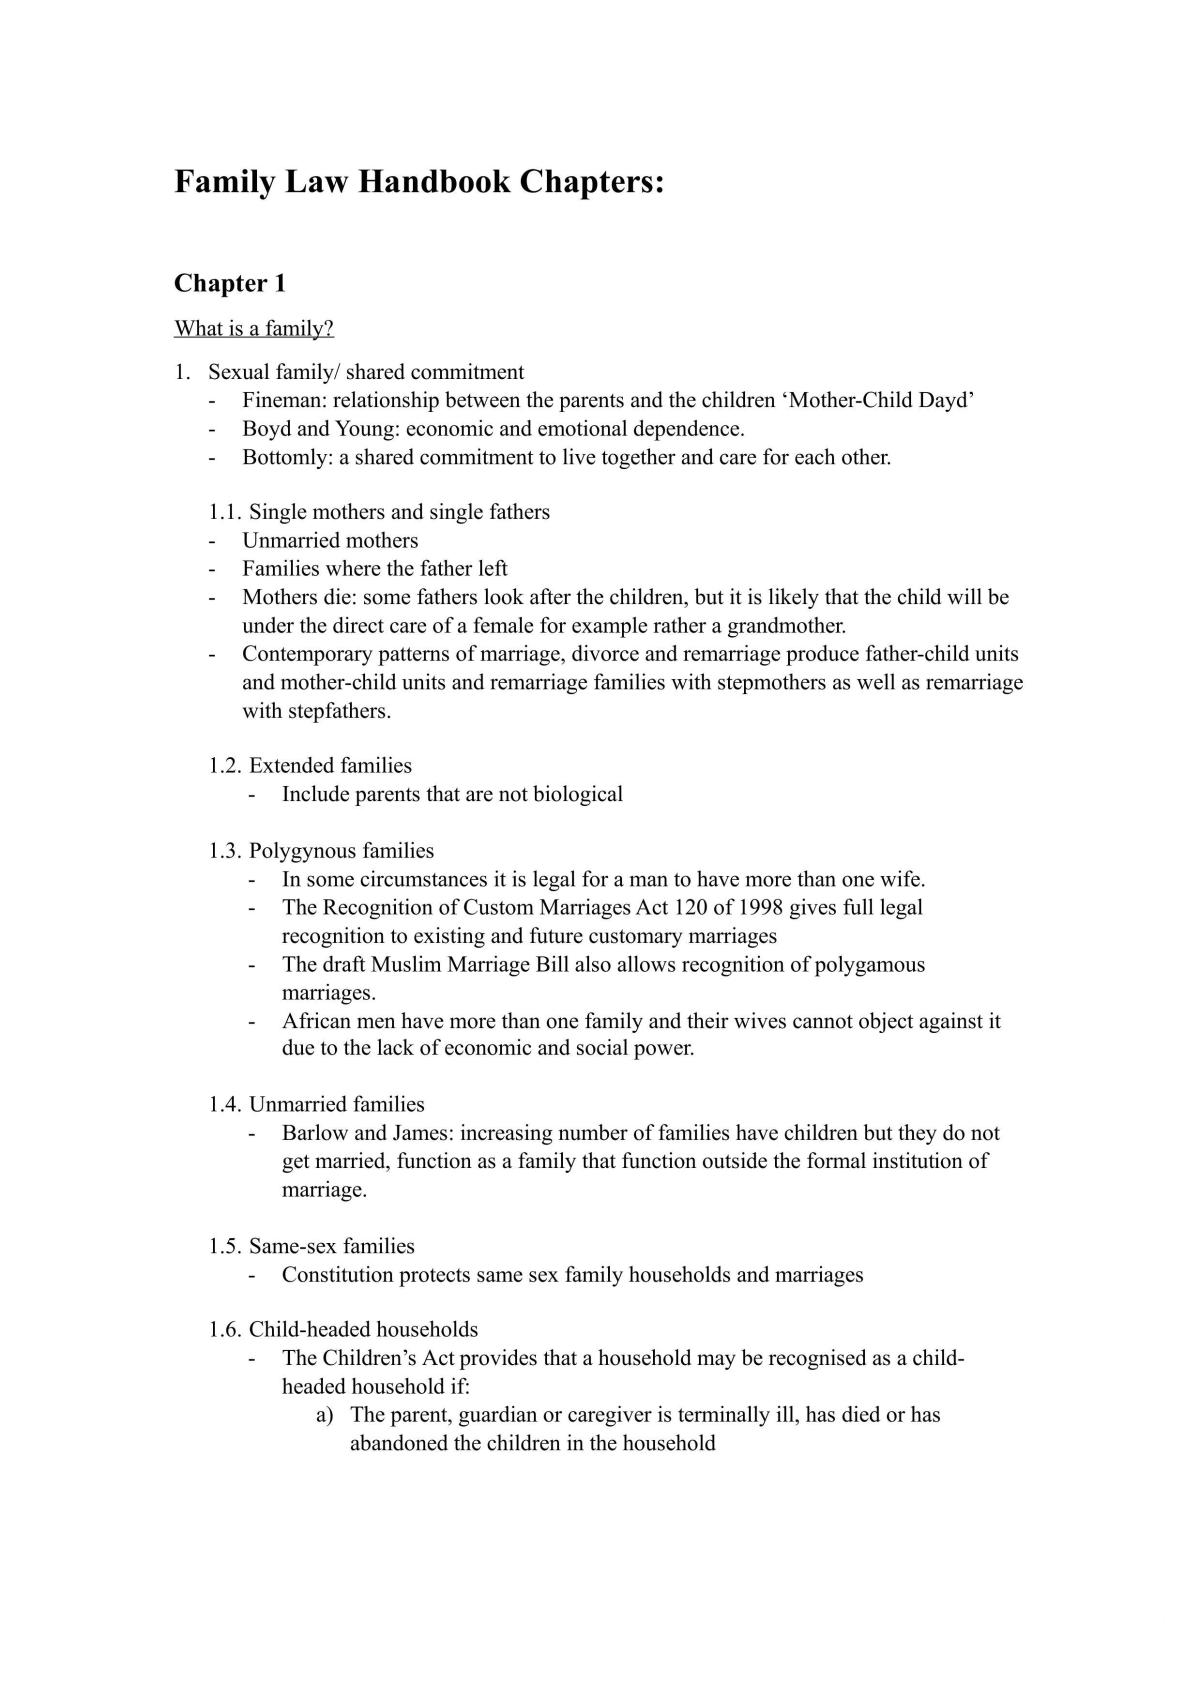 Law of Persons Course Guide - Page 1